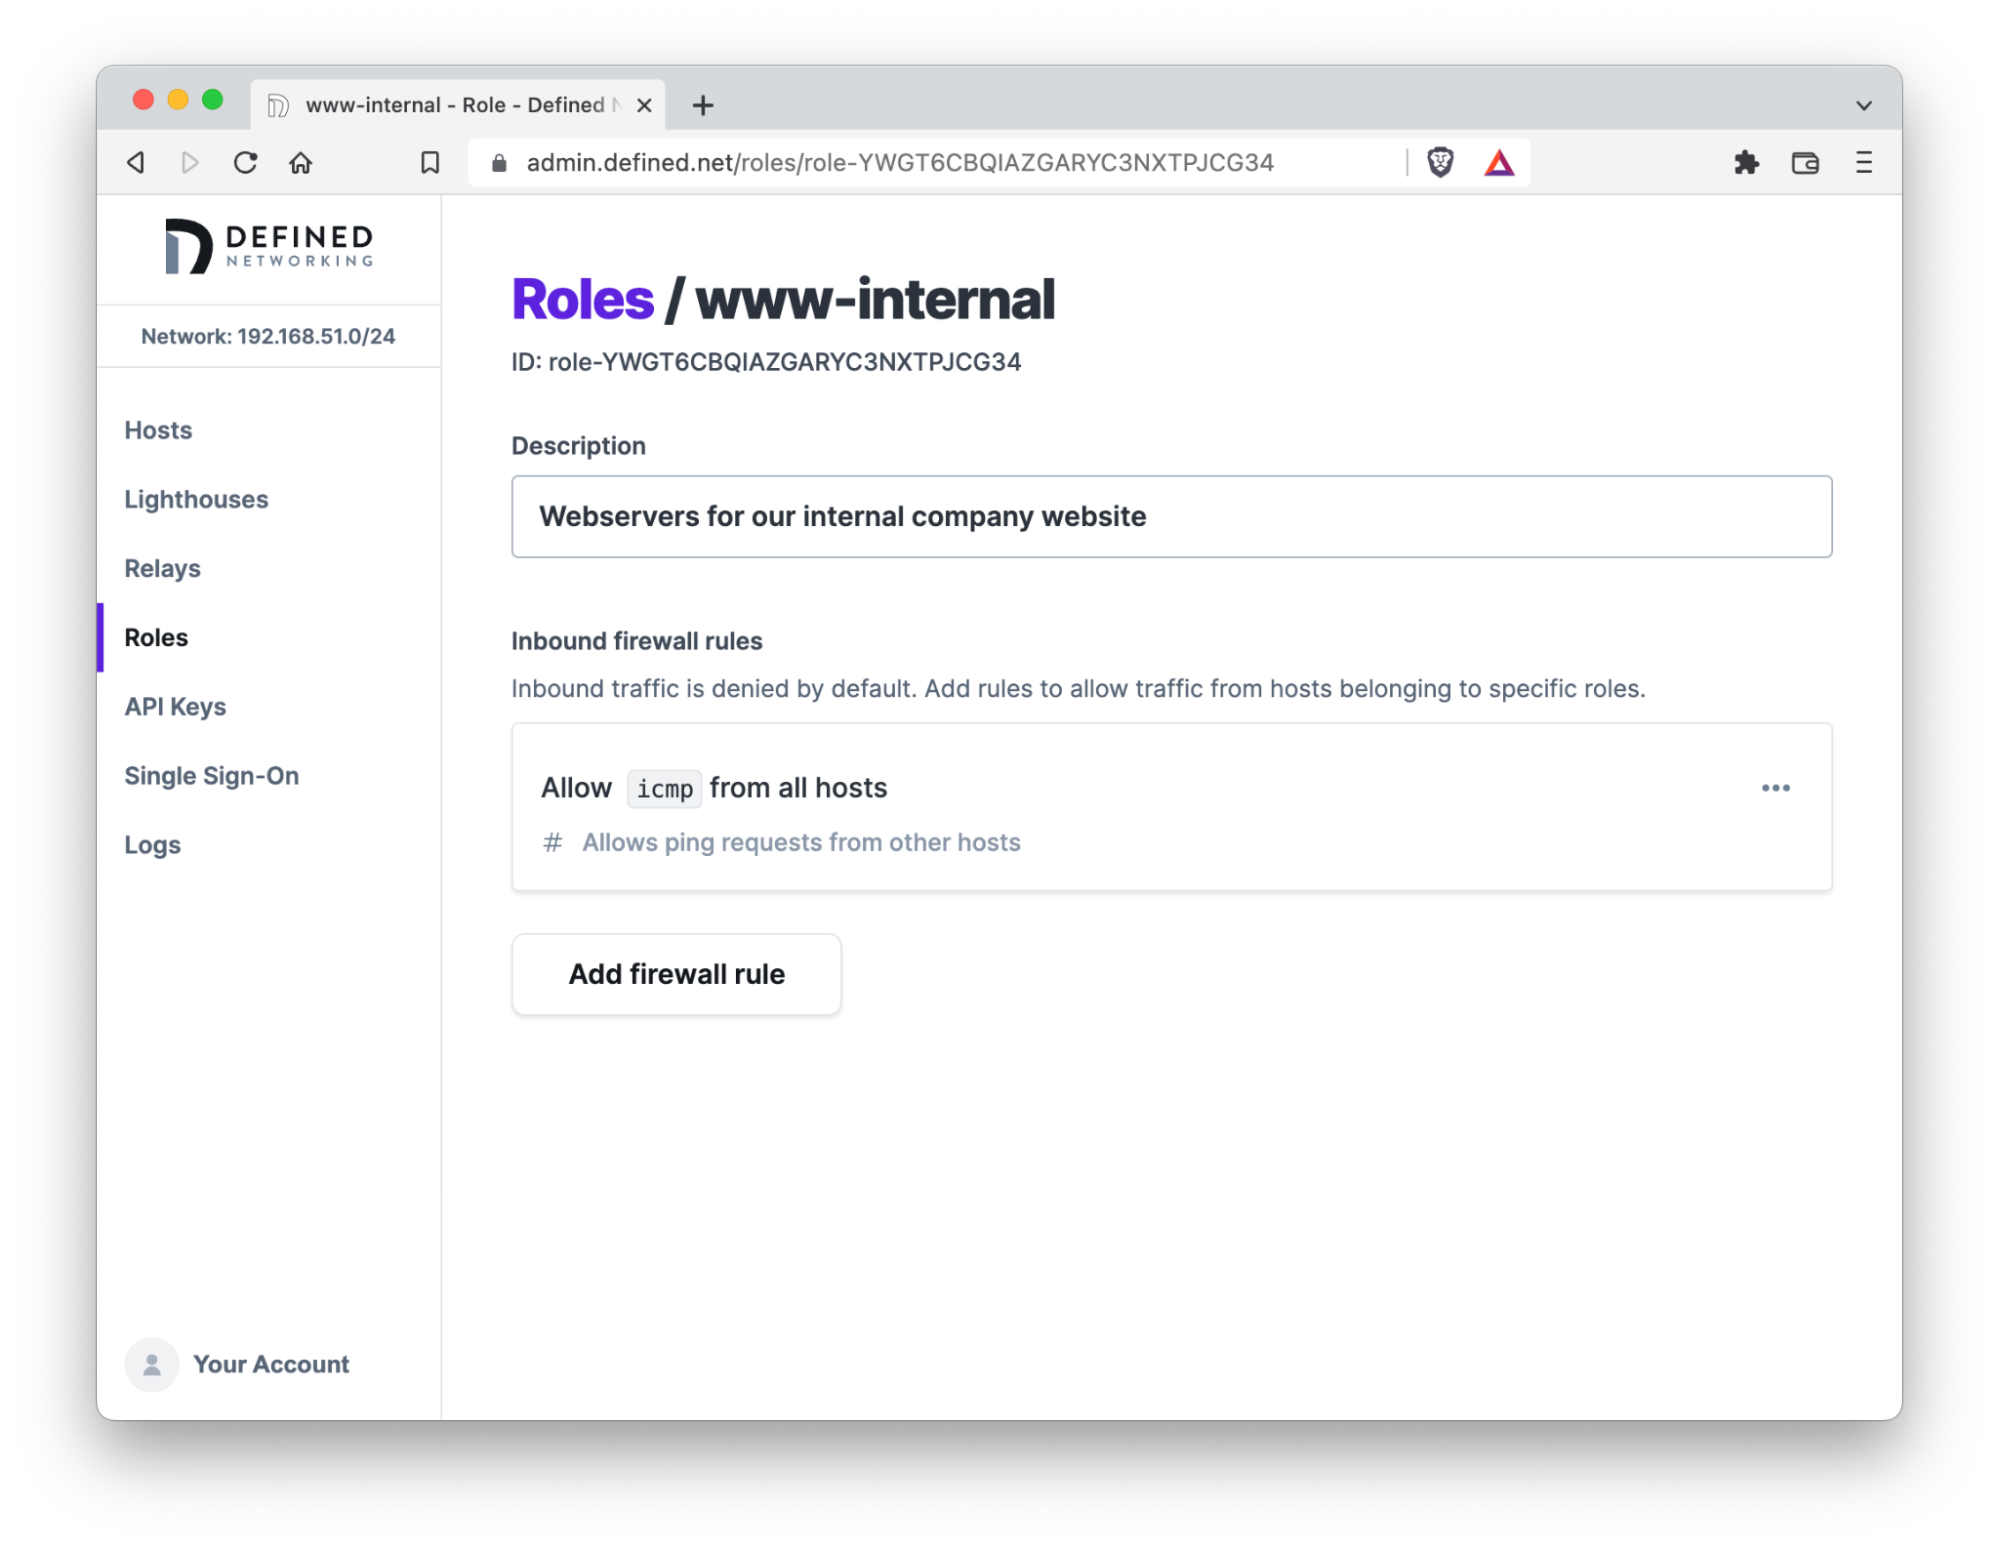 Page showing details for role `www-internal`, showing the role ID, description, and a default inbound firewall rule allowing `ICMP` from all hosts, so you can ping the host